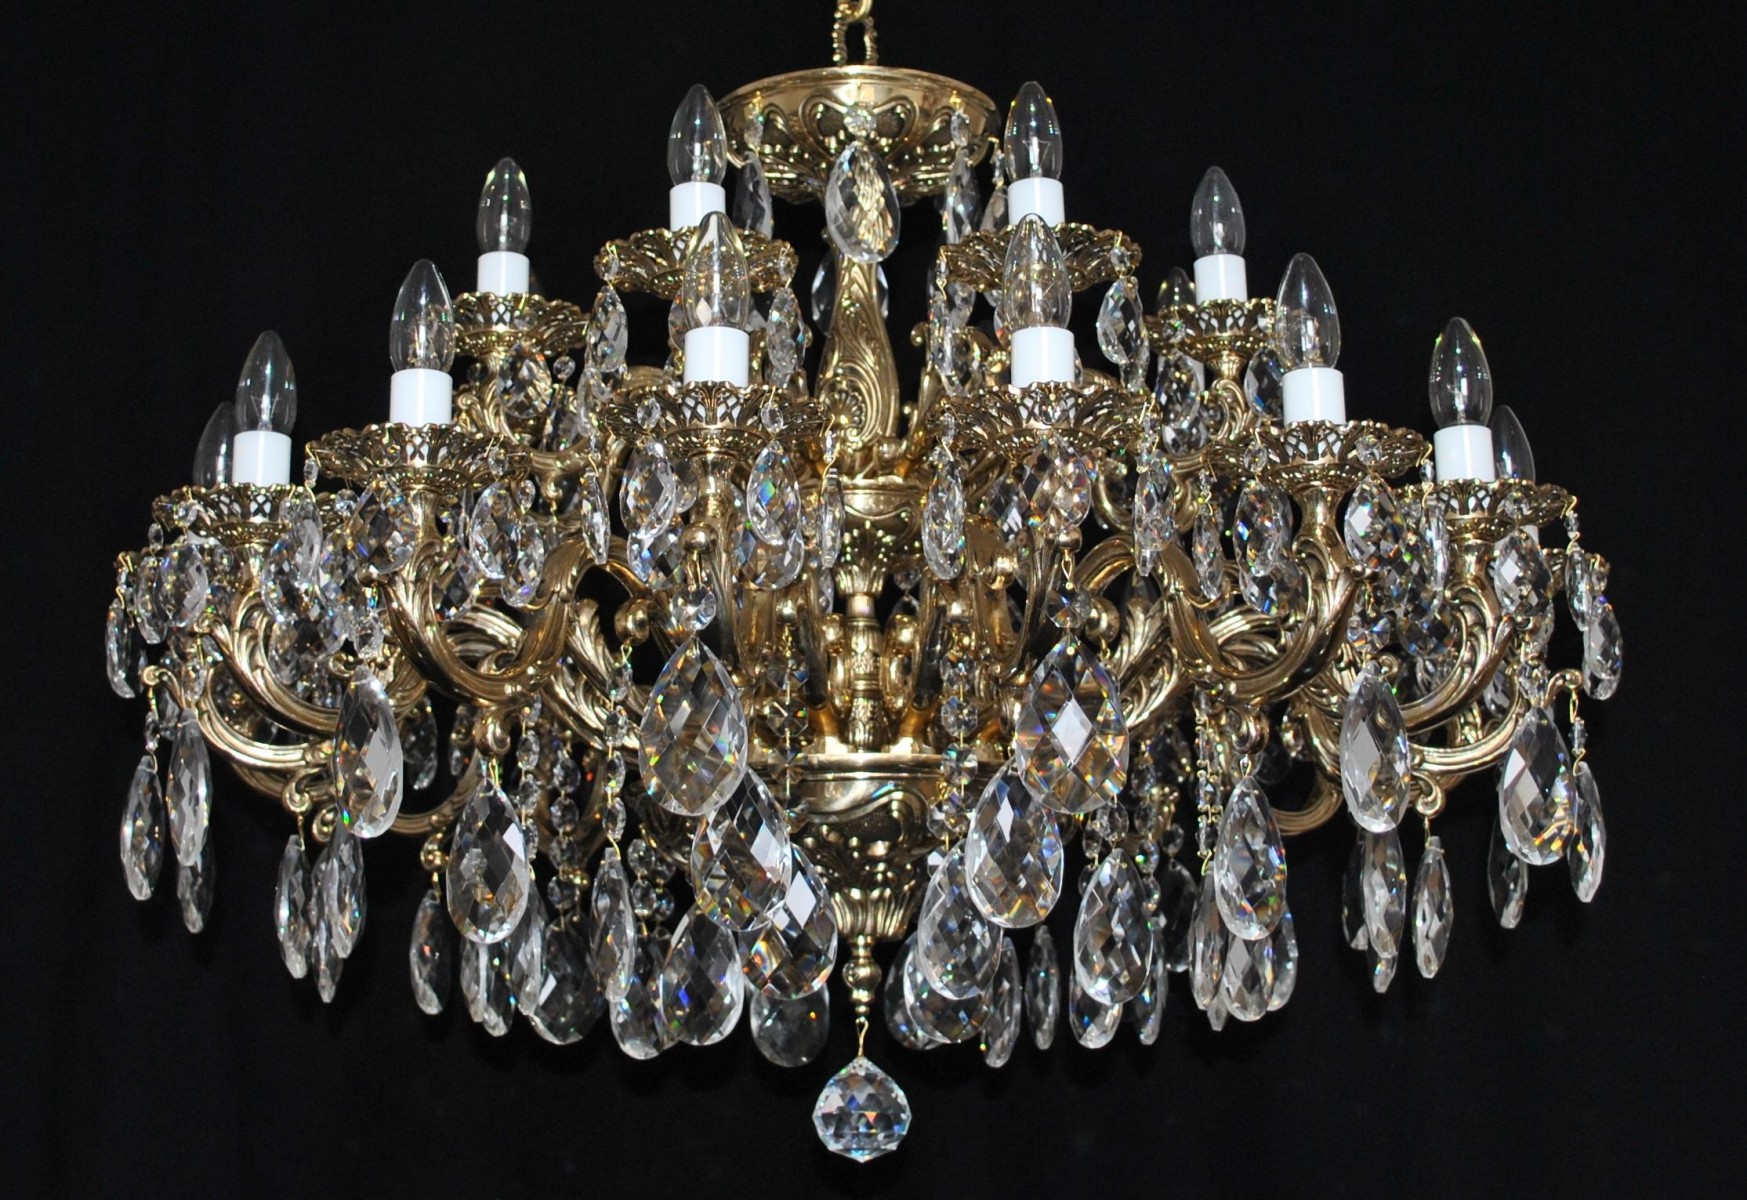 Antique Vintage Brass & Crystals French Chandelier With 12 Arms Chandelier  Light